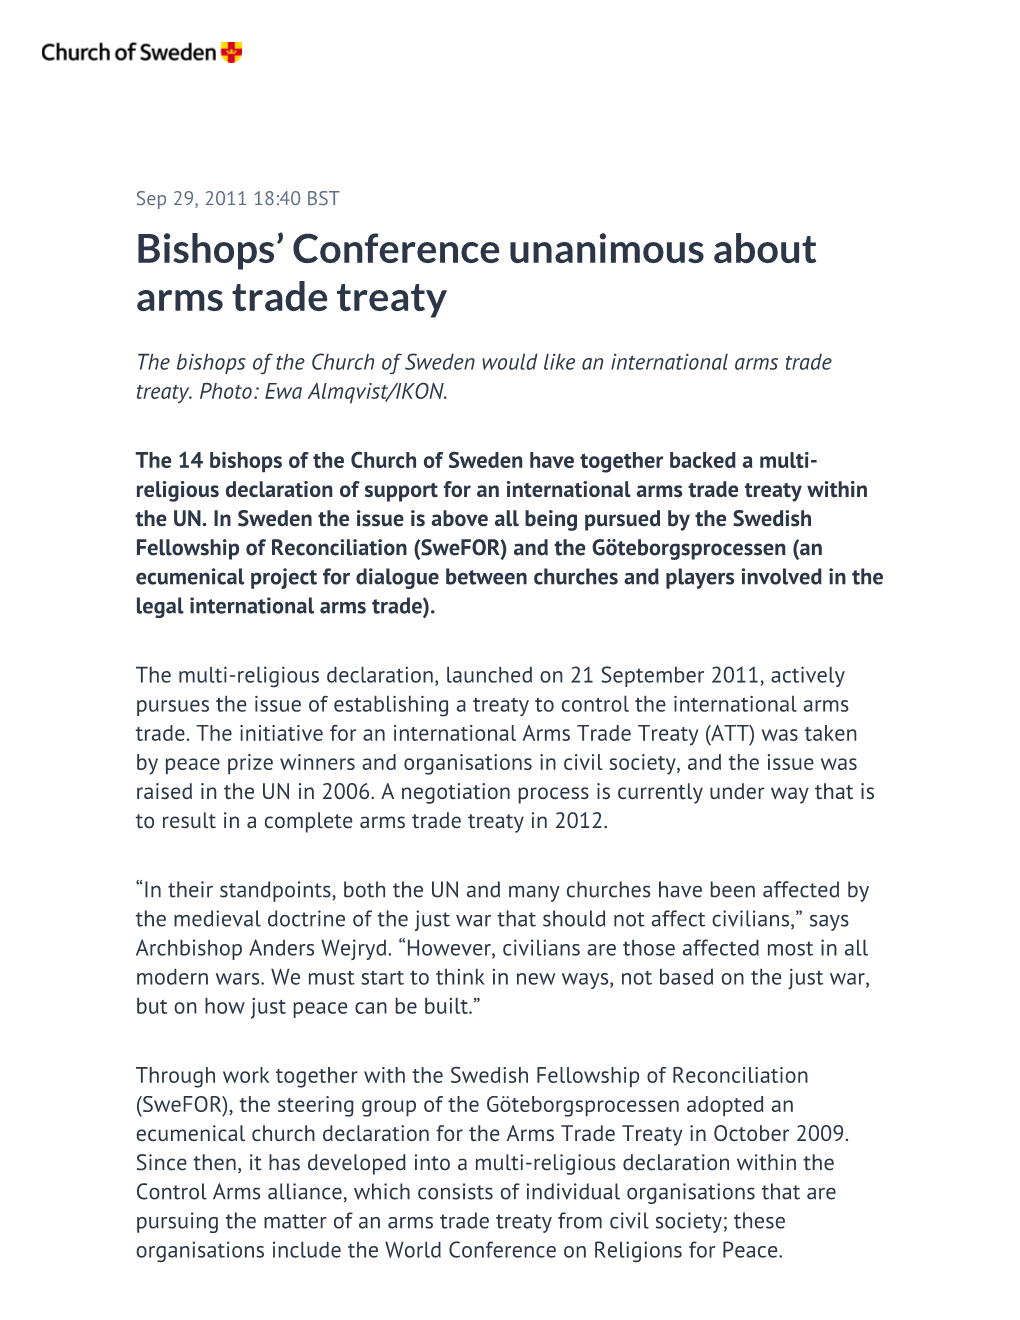 Bishops' Conference Unanimous About Arms Trade Treaty